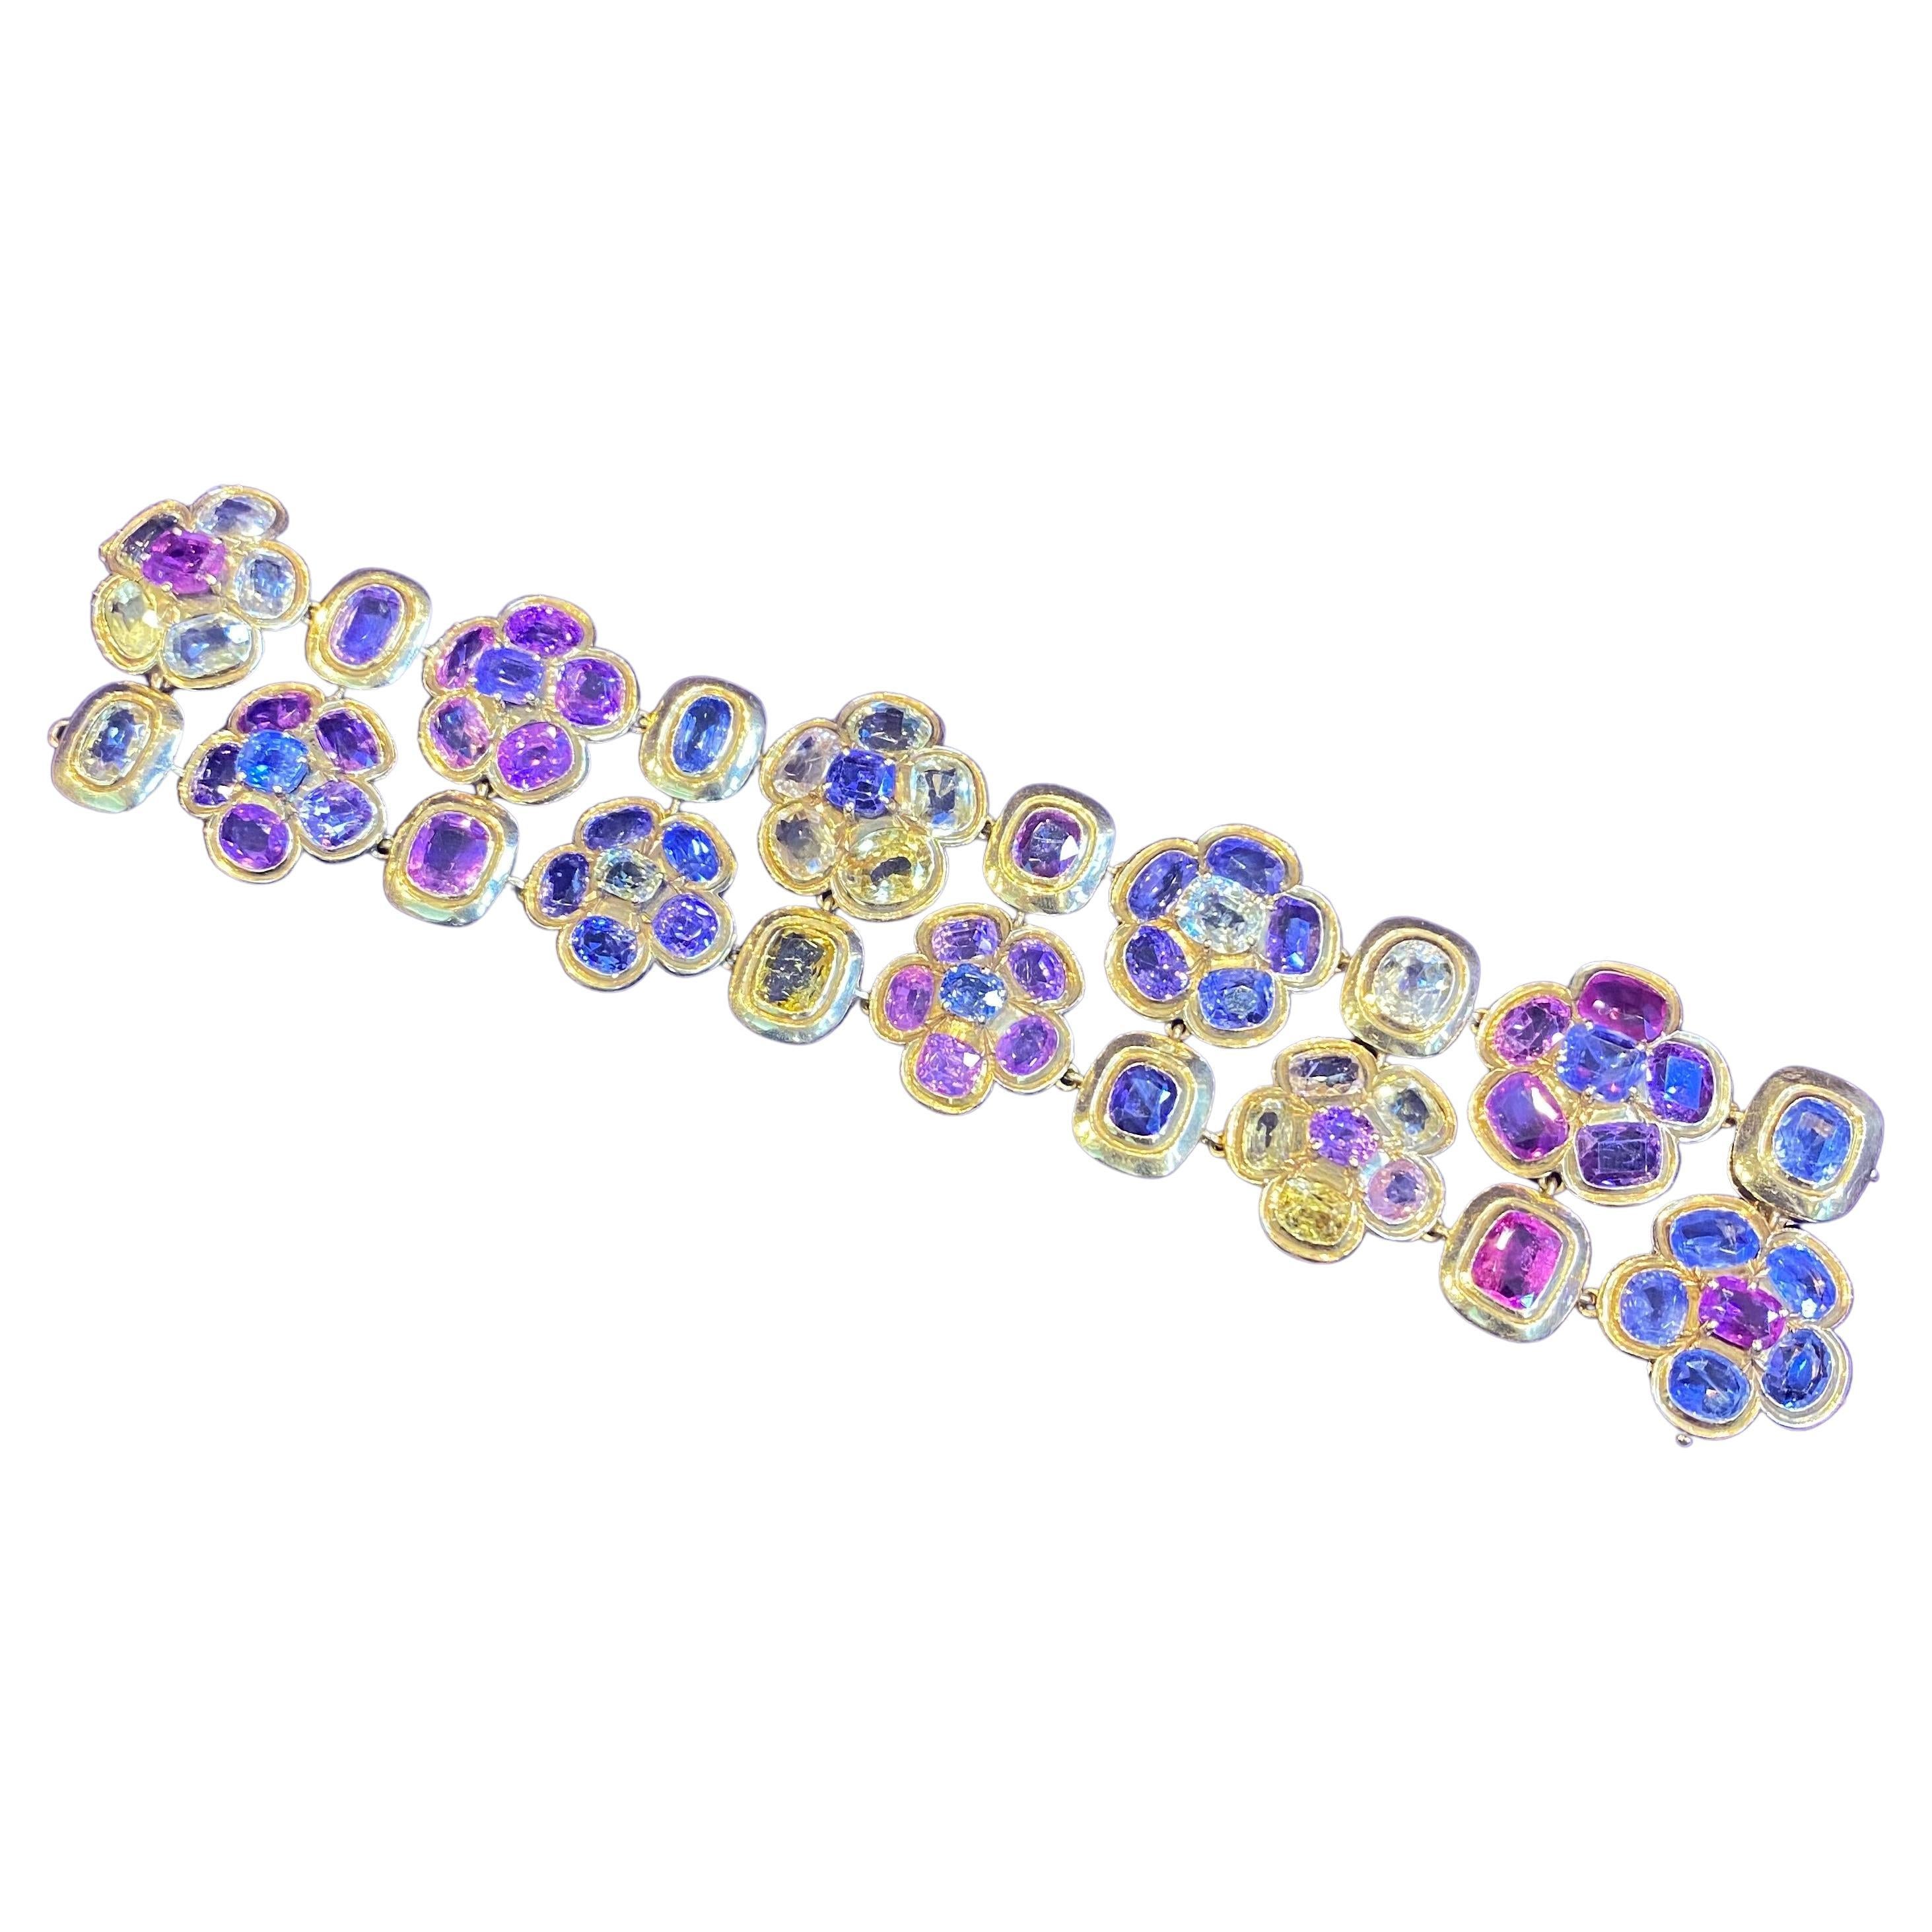 Rene Boivin Sapphire bracelet. Of floral design, set with 70 cushion and oval-shaped sapphires of various colors

Length 7½ inches

French assay and maker's marks.

Provenance:
For a parure of similar design, see Rene Boivin Joaillier, by Françoise